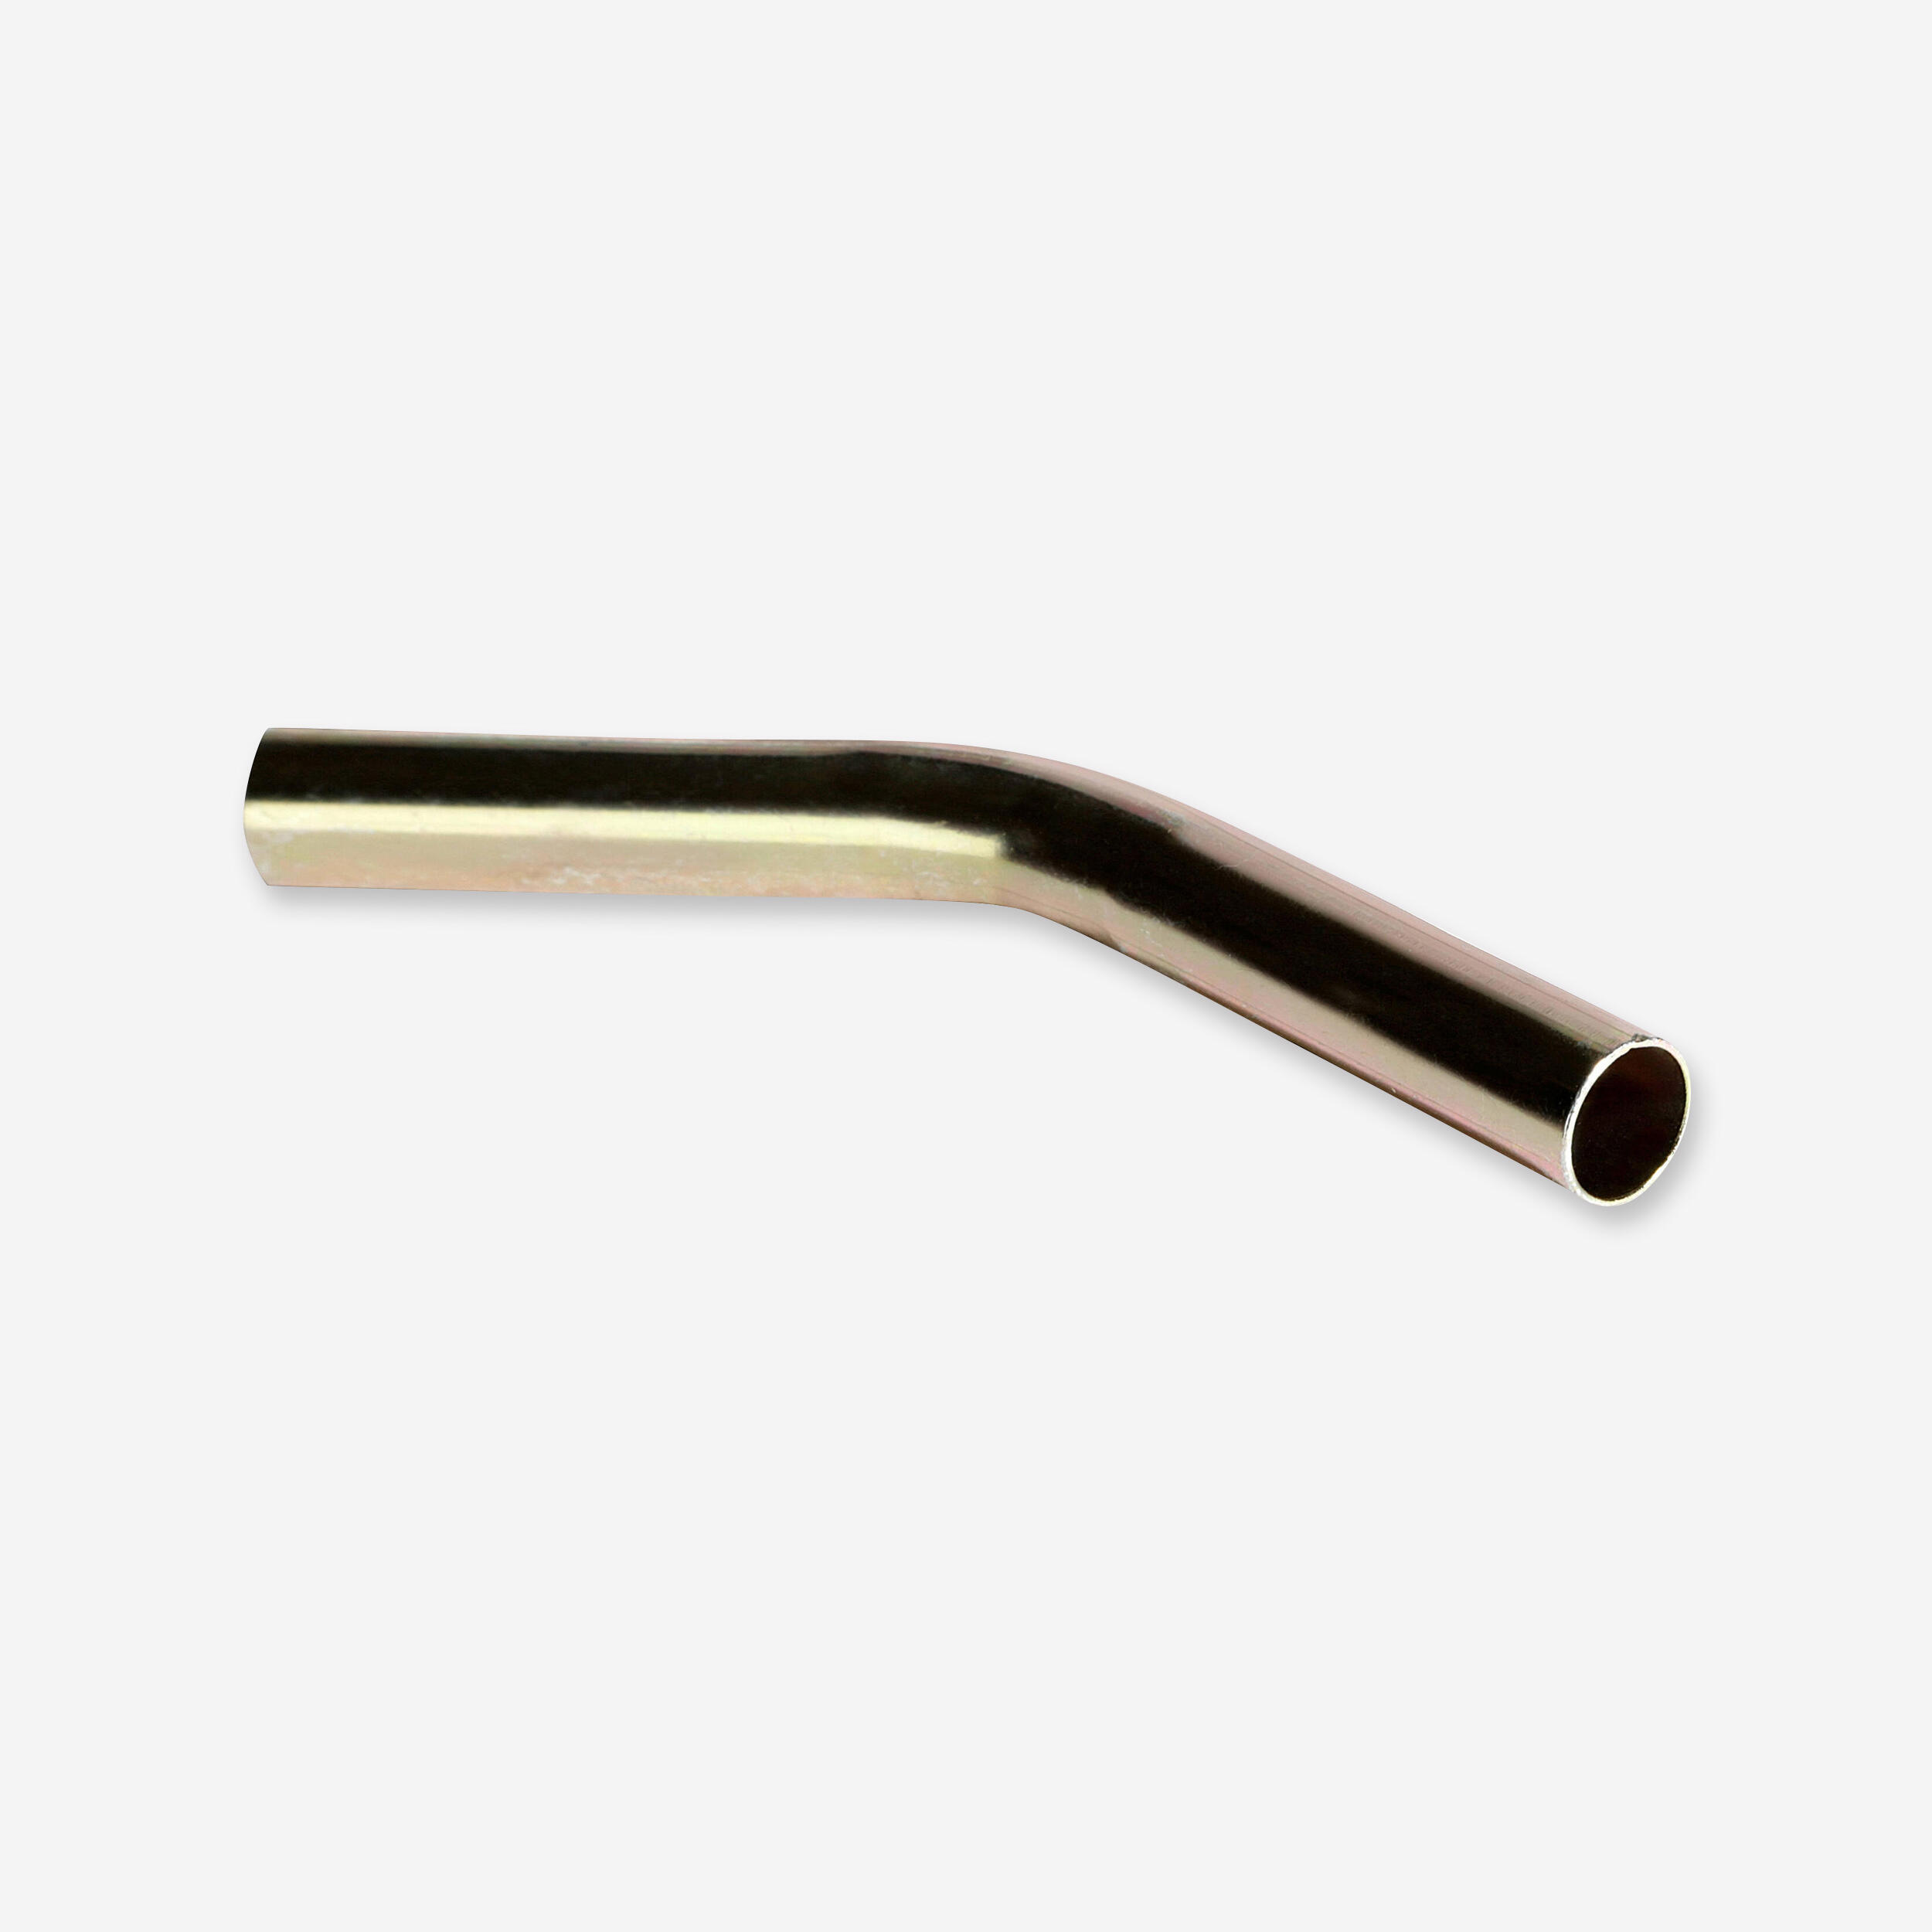 QUECHUA ANGLED FERRULE - 7.9 MM DIAMETER - 169° ANGLE - POLE TENT SPARE PART